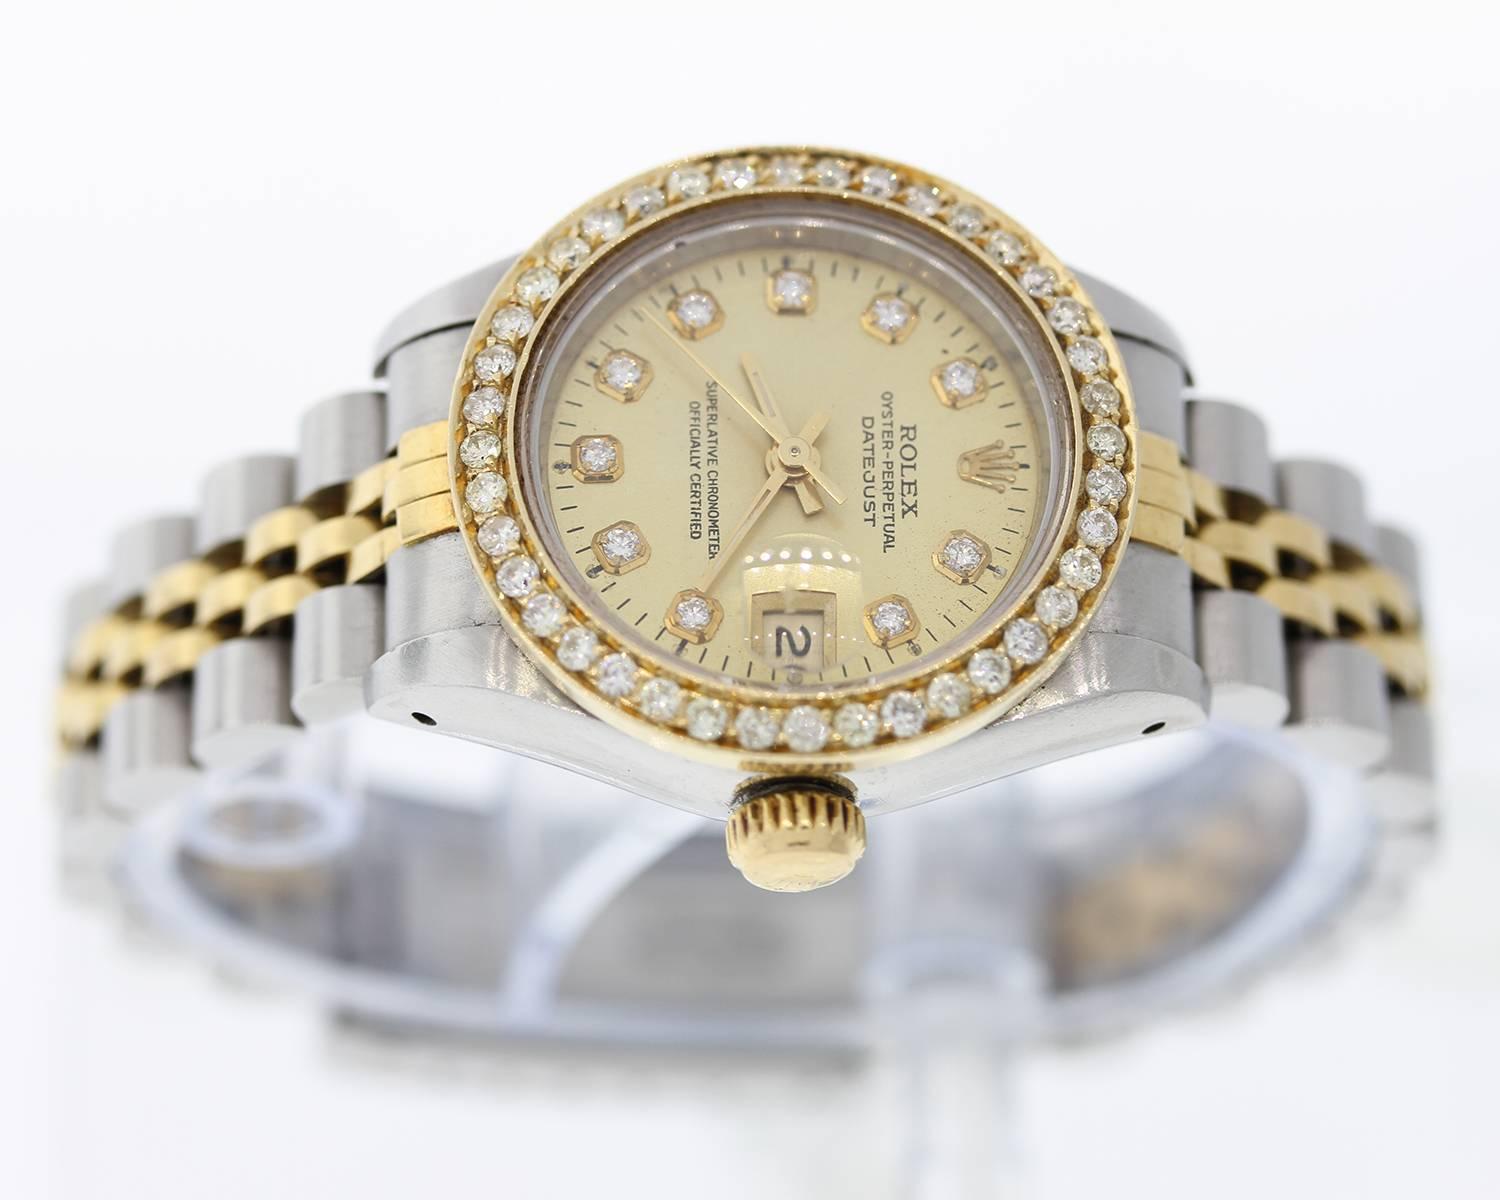 Brand Name: Rolex
Style Number: 30919
Style Name: Datejust
Color Name (Dial): Custom Champagne Diamond Dial
Country of Manufacture: Switzerland
Gender: Womens
Strap Material: Stainless Steel/18K Yellow Gold
Case Metal: Stainless Steel/18K